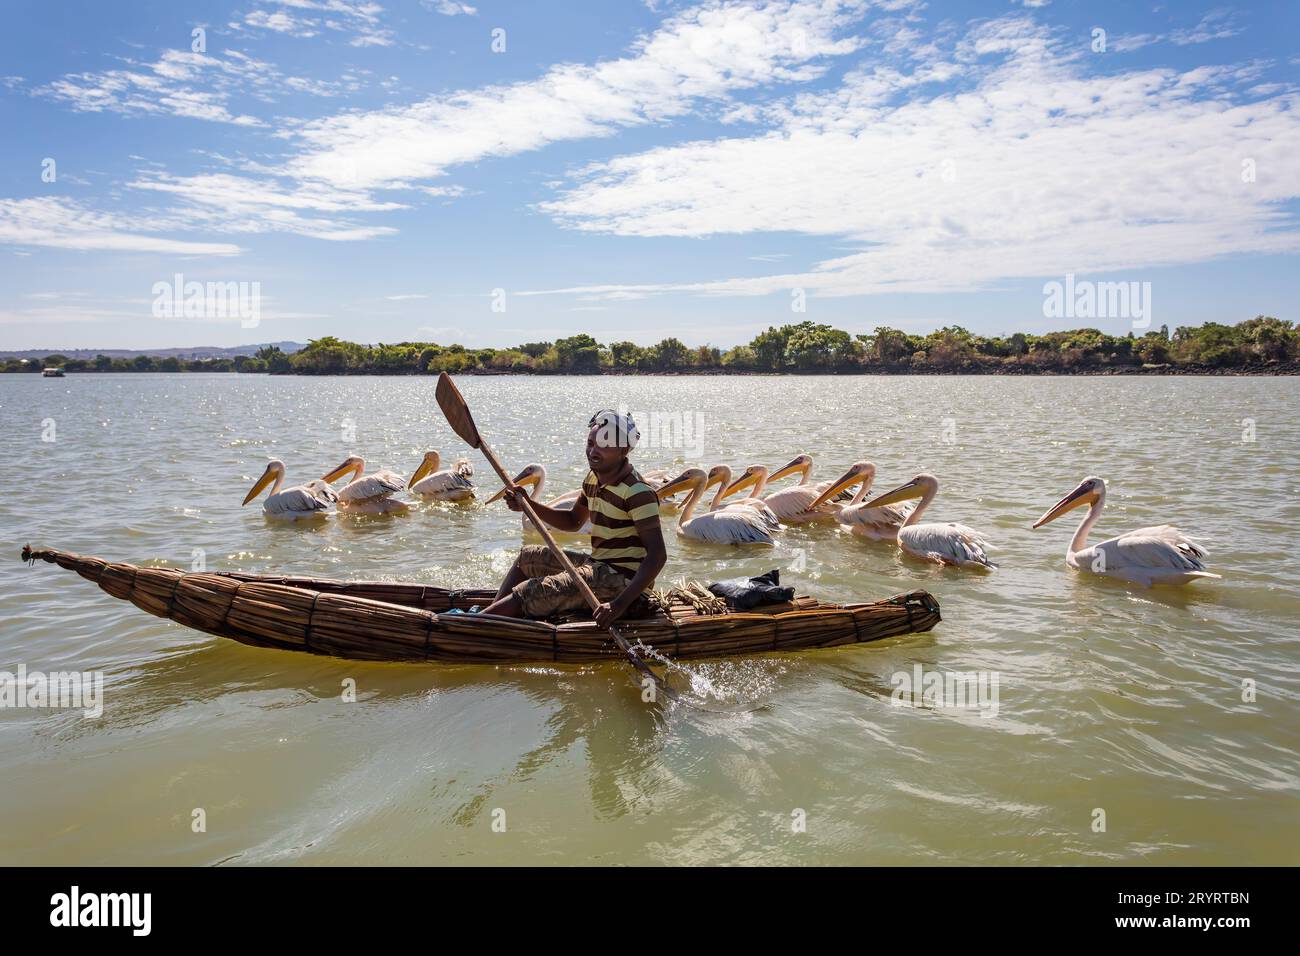 Man on a traditional and primitive bamboo boat feeding pelicans on Lake Tana Stock Photo